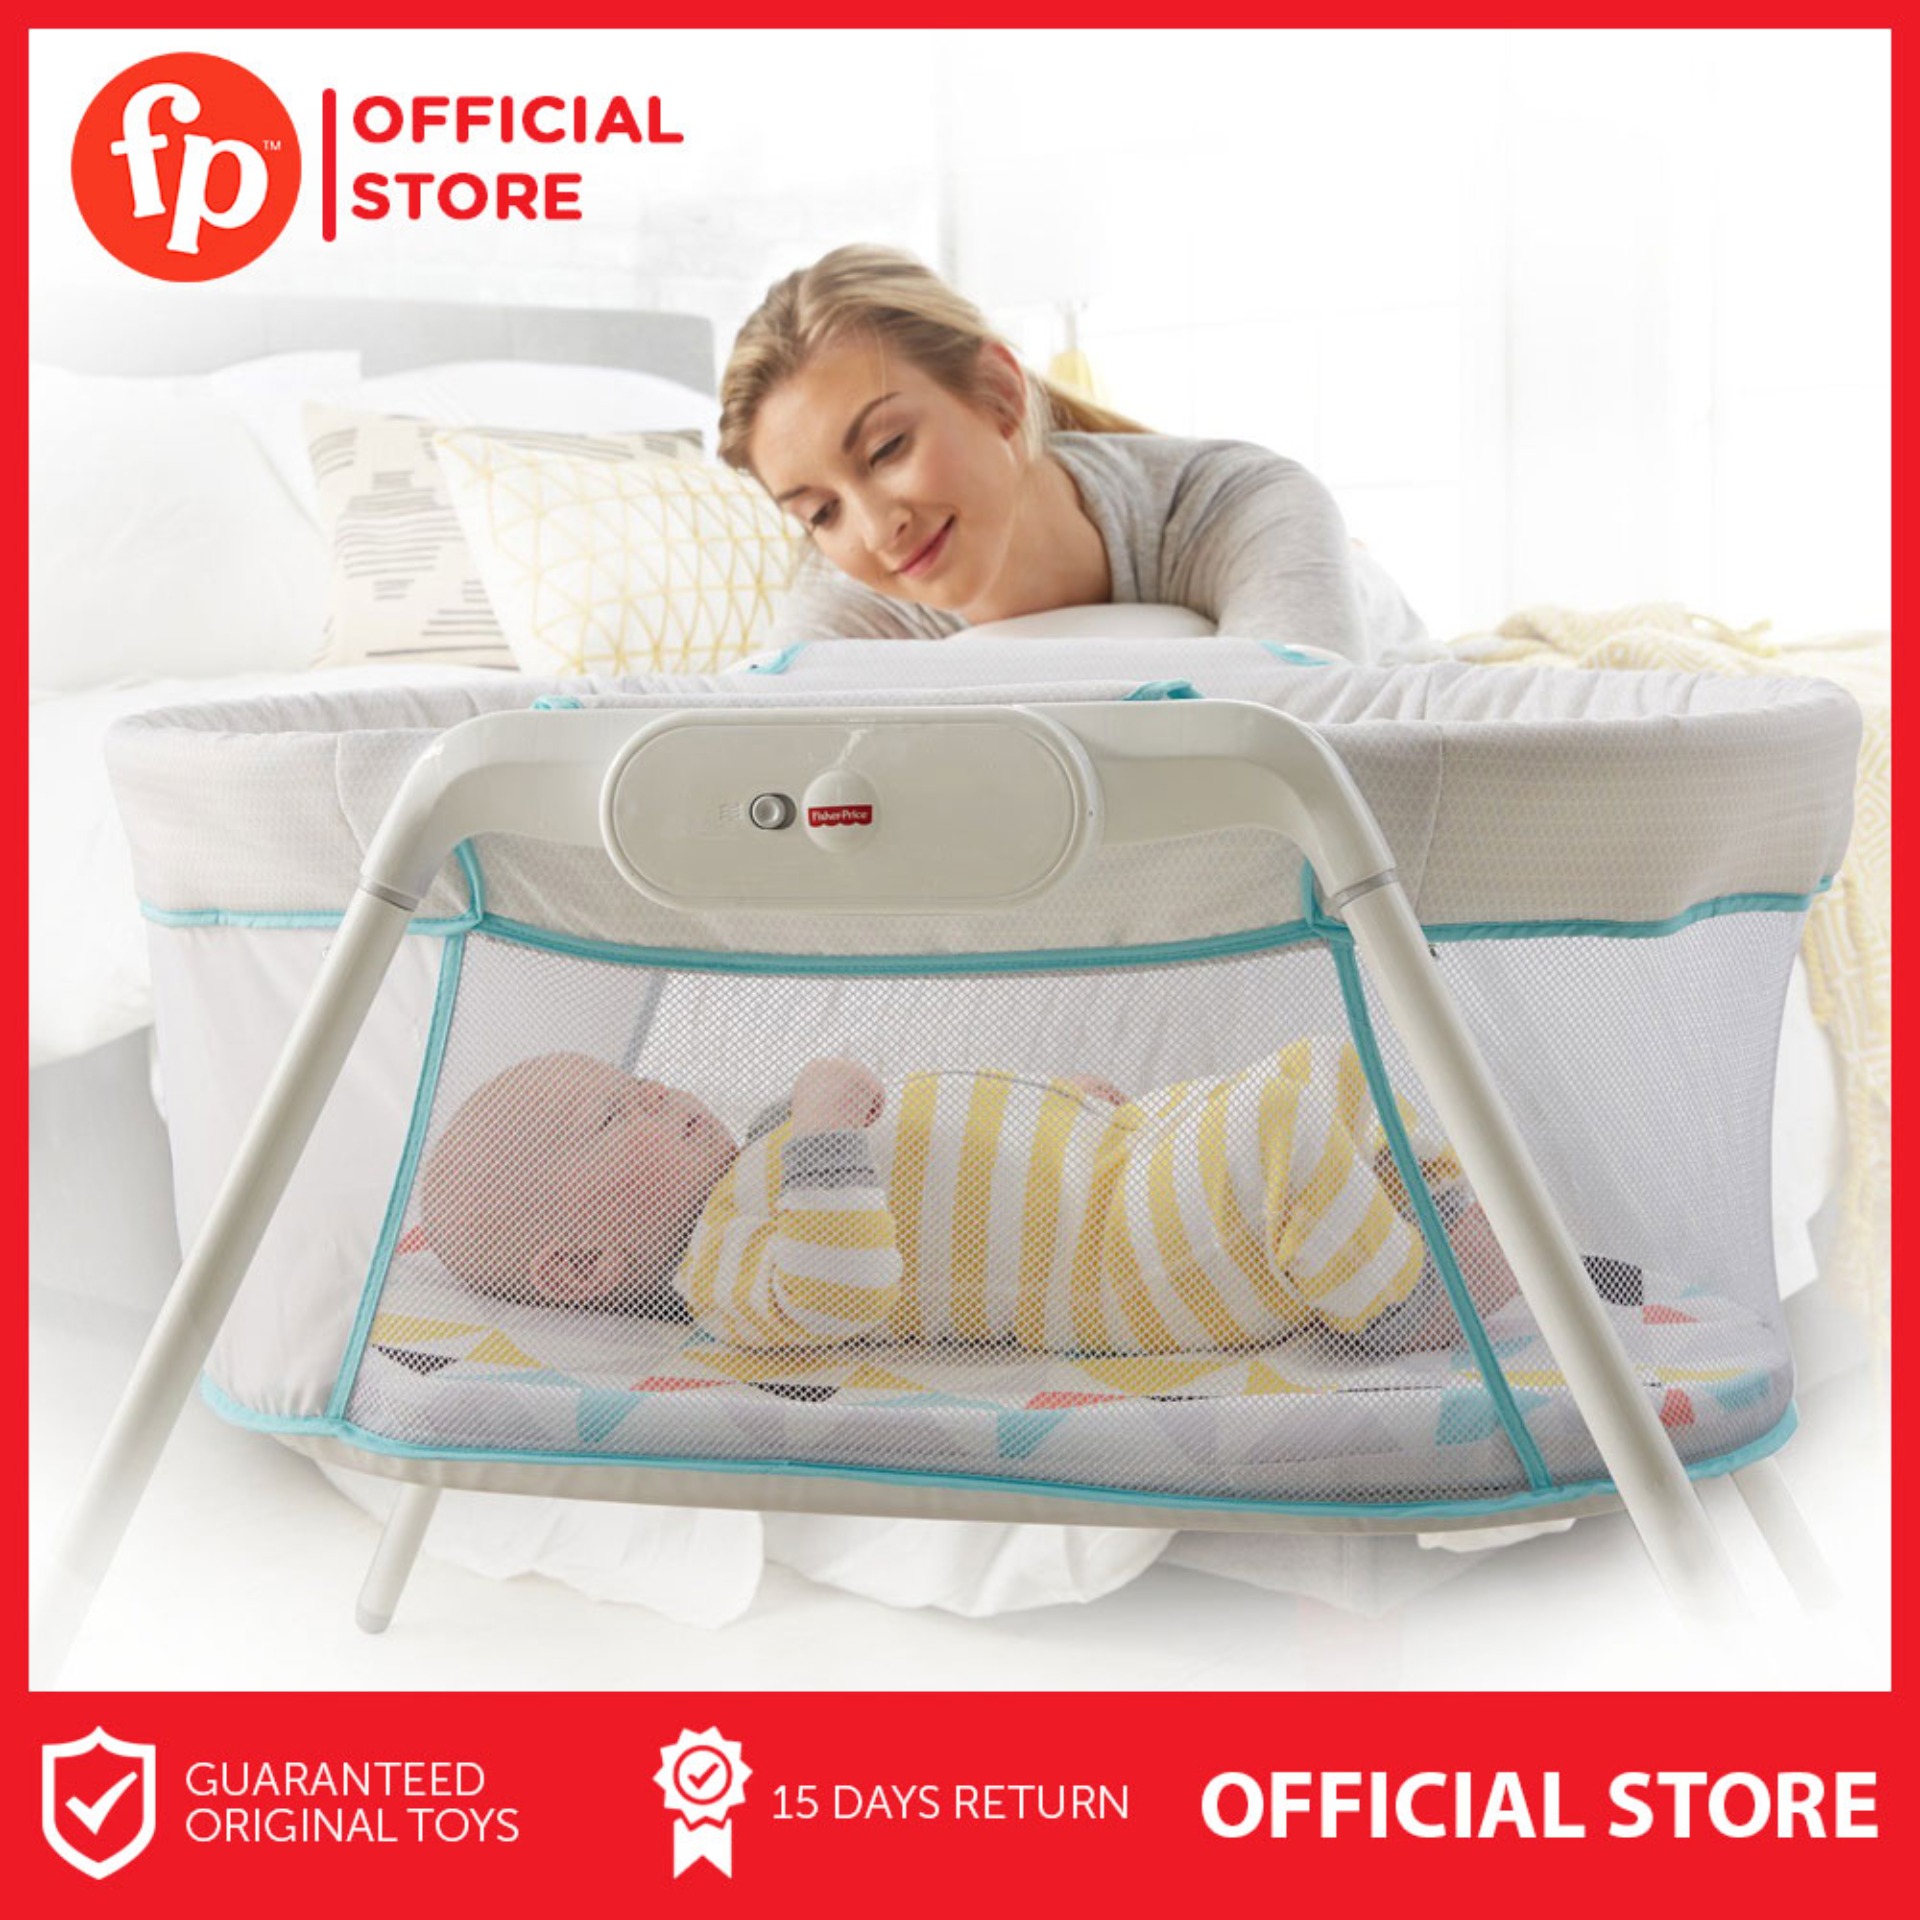 online baby furniture stores